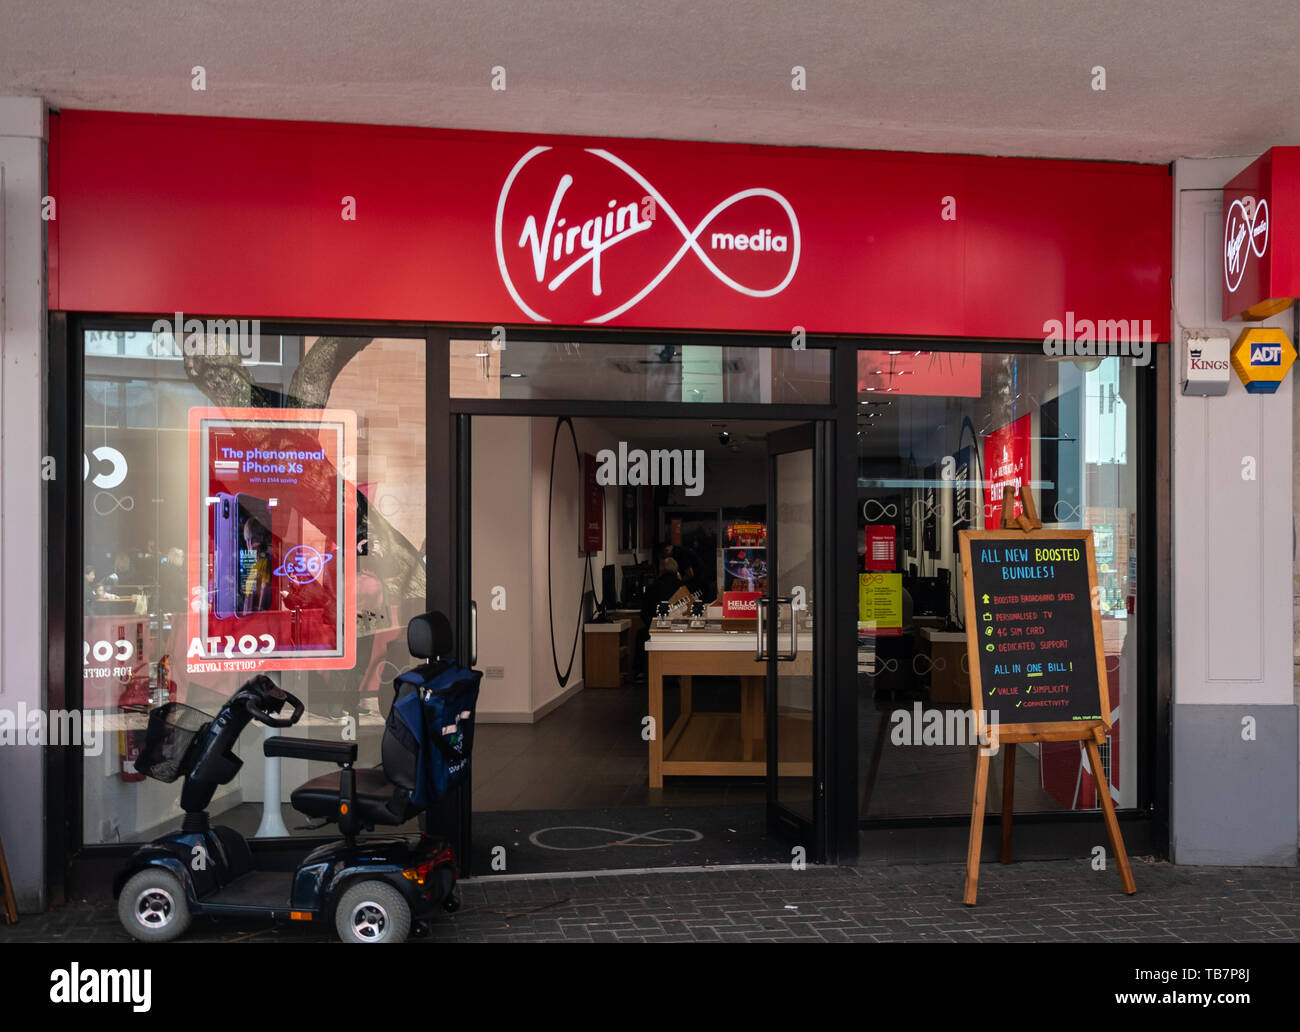 Swindon, United Kingdom - May 04 2019:   The Frontage of Virgin Media Store on the Parade Stock Photo